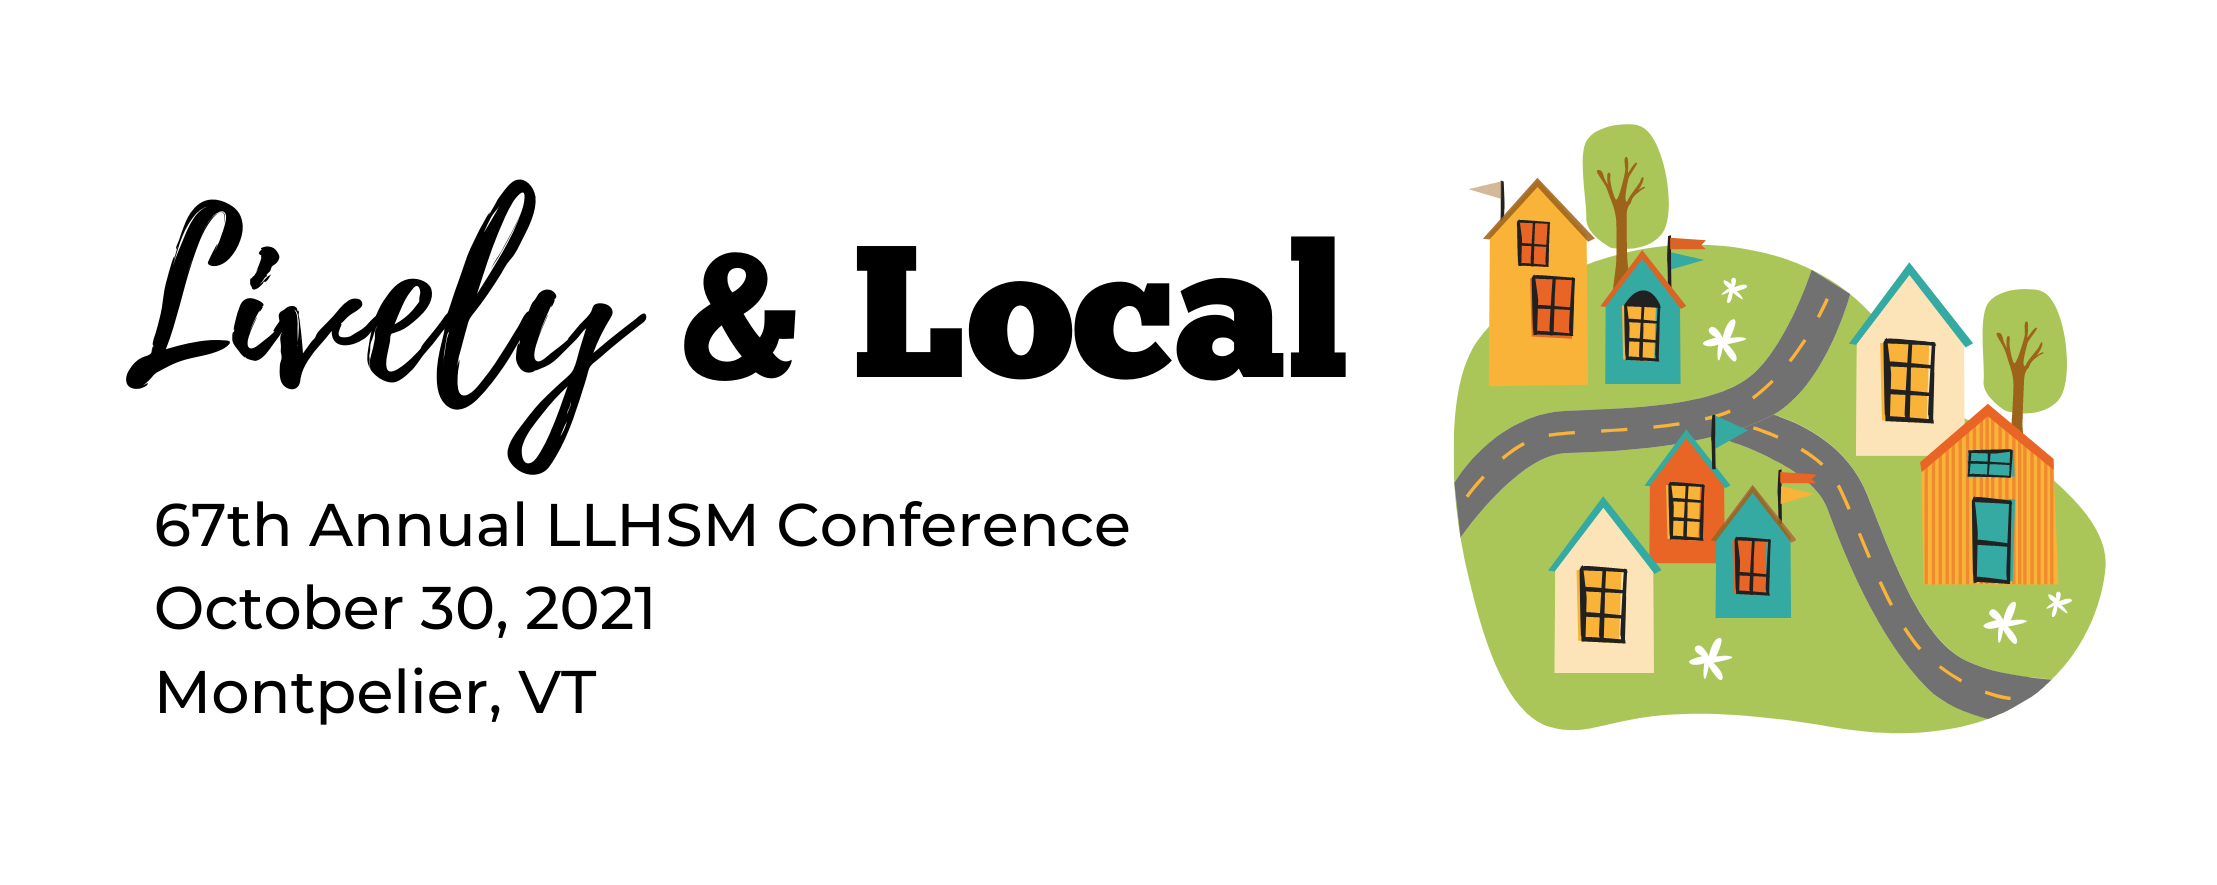 Lively & Local, 67th Annual LLHSM Conference